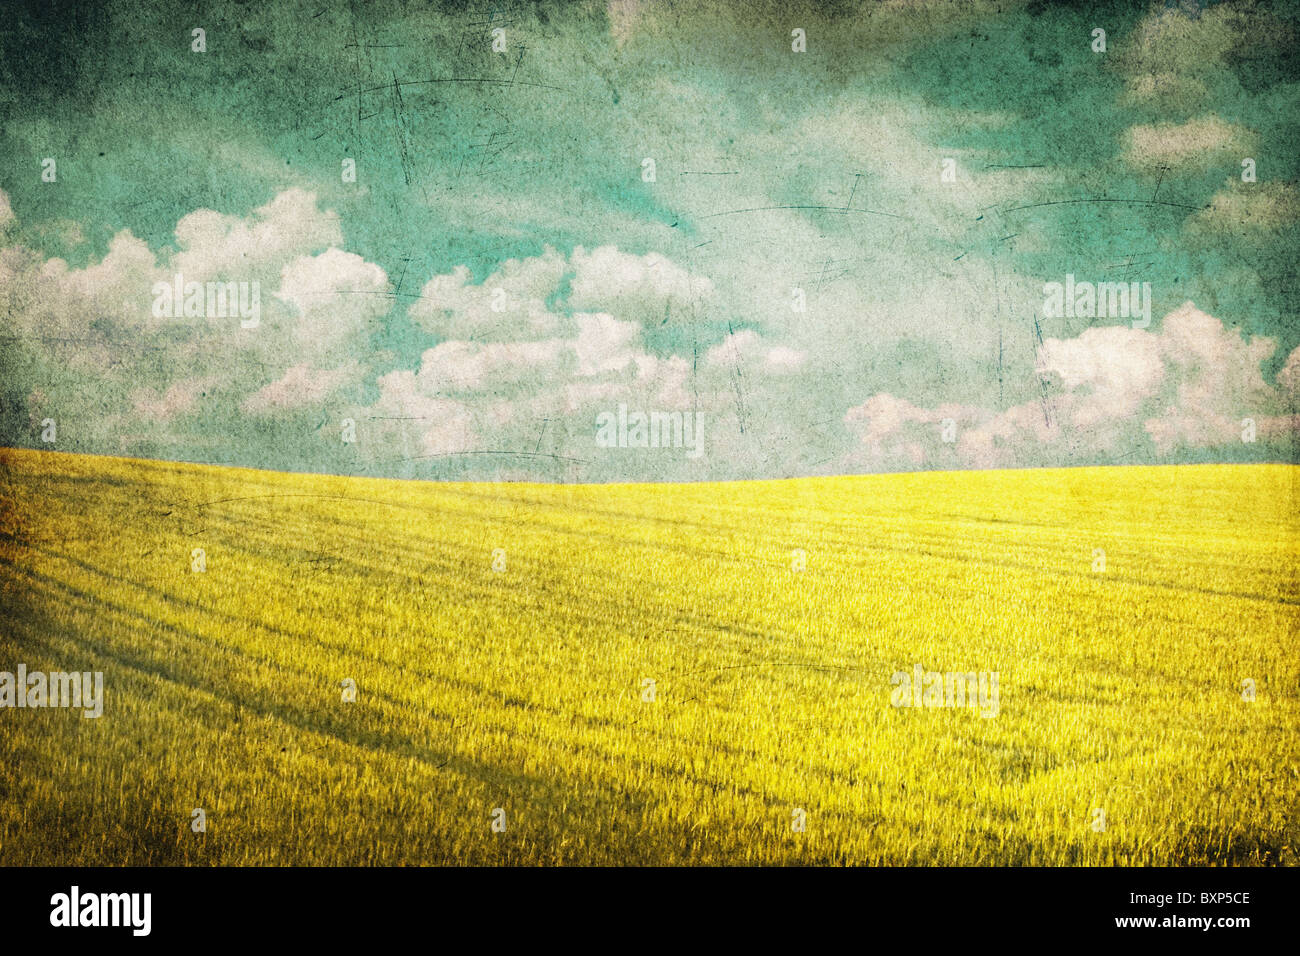 grunge background image of yellow field and blue sky Stock Photo